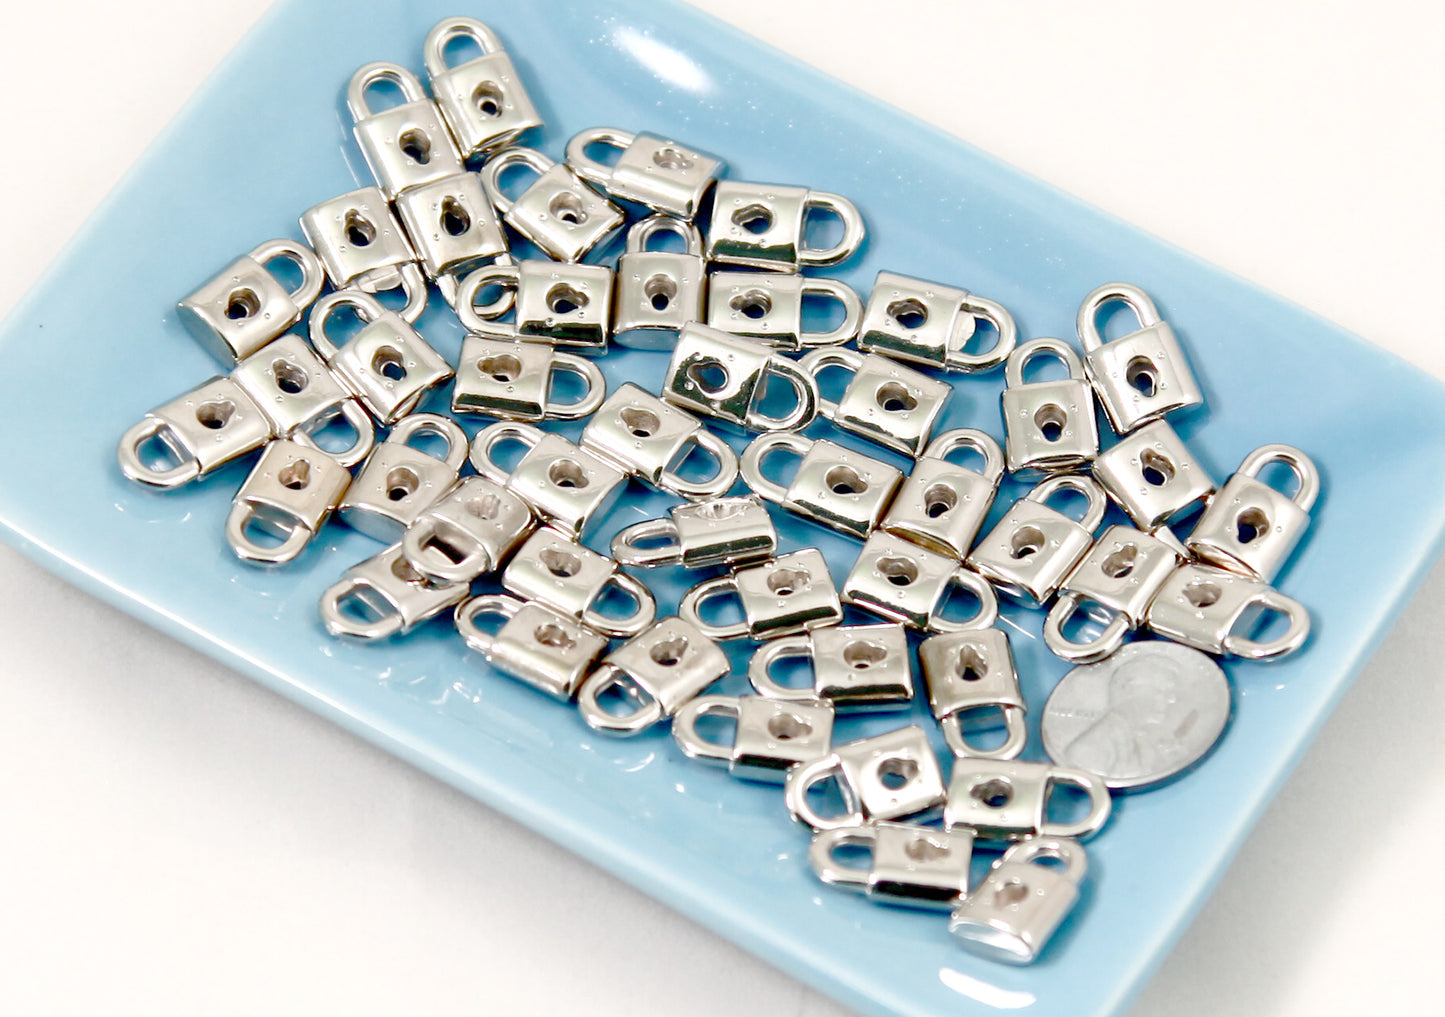 Lock Charms - 50 pc set - 17mm Tiny Electroplated Silver Padlock Charm - Easy to make into Jewelry